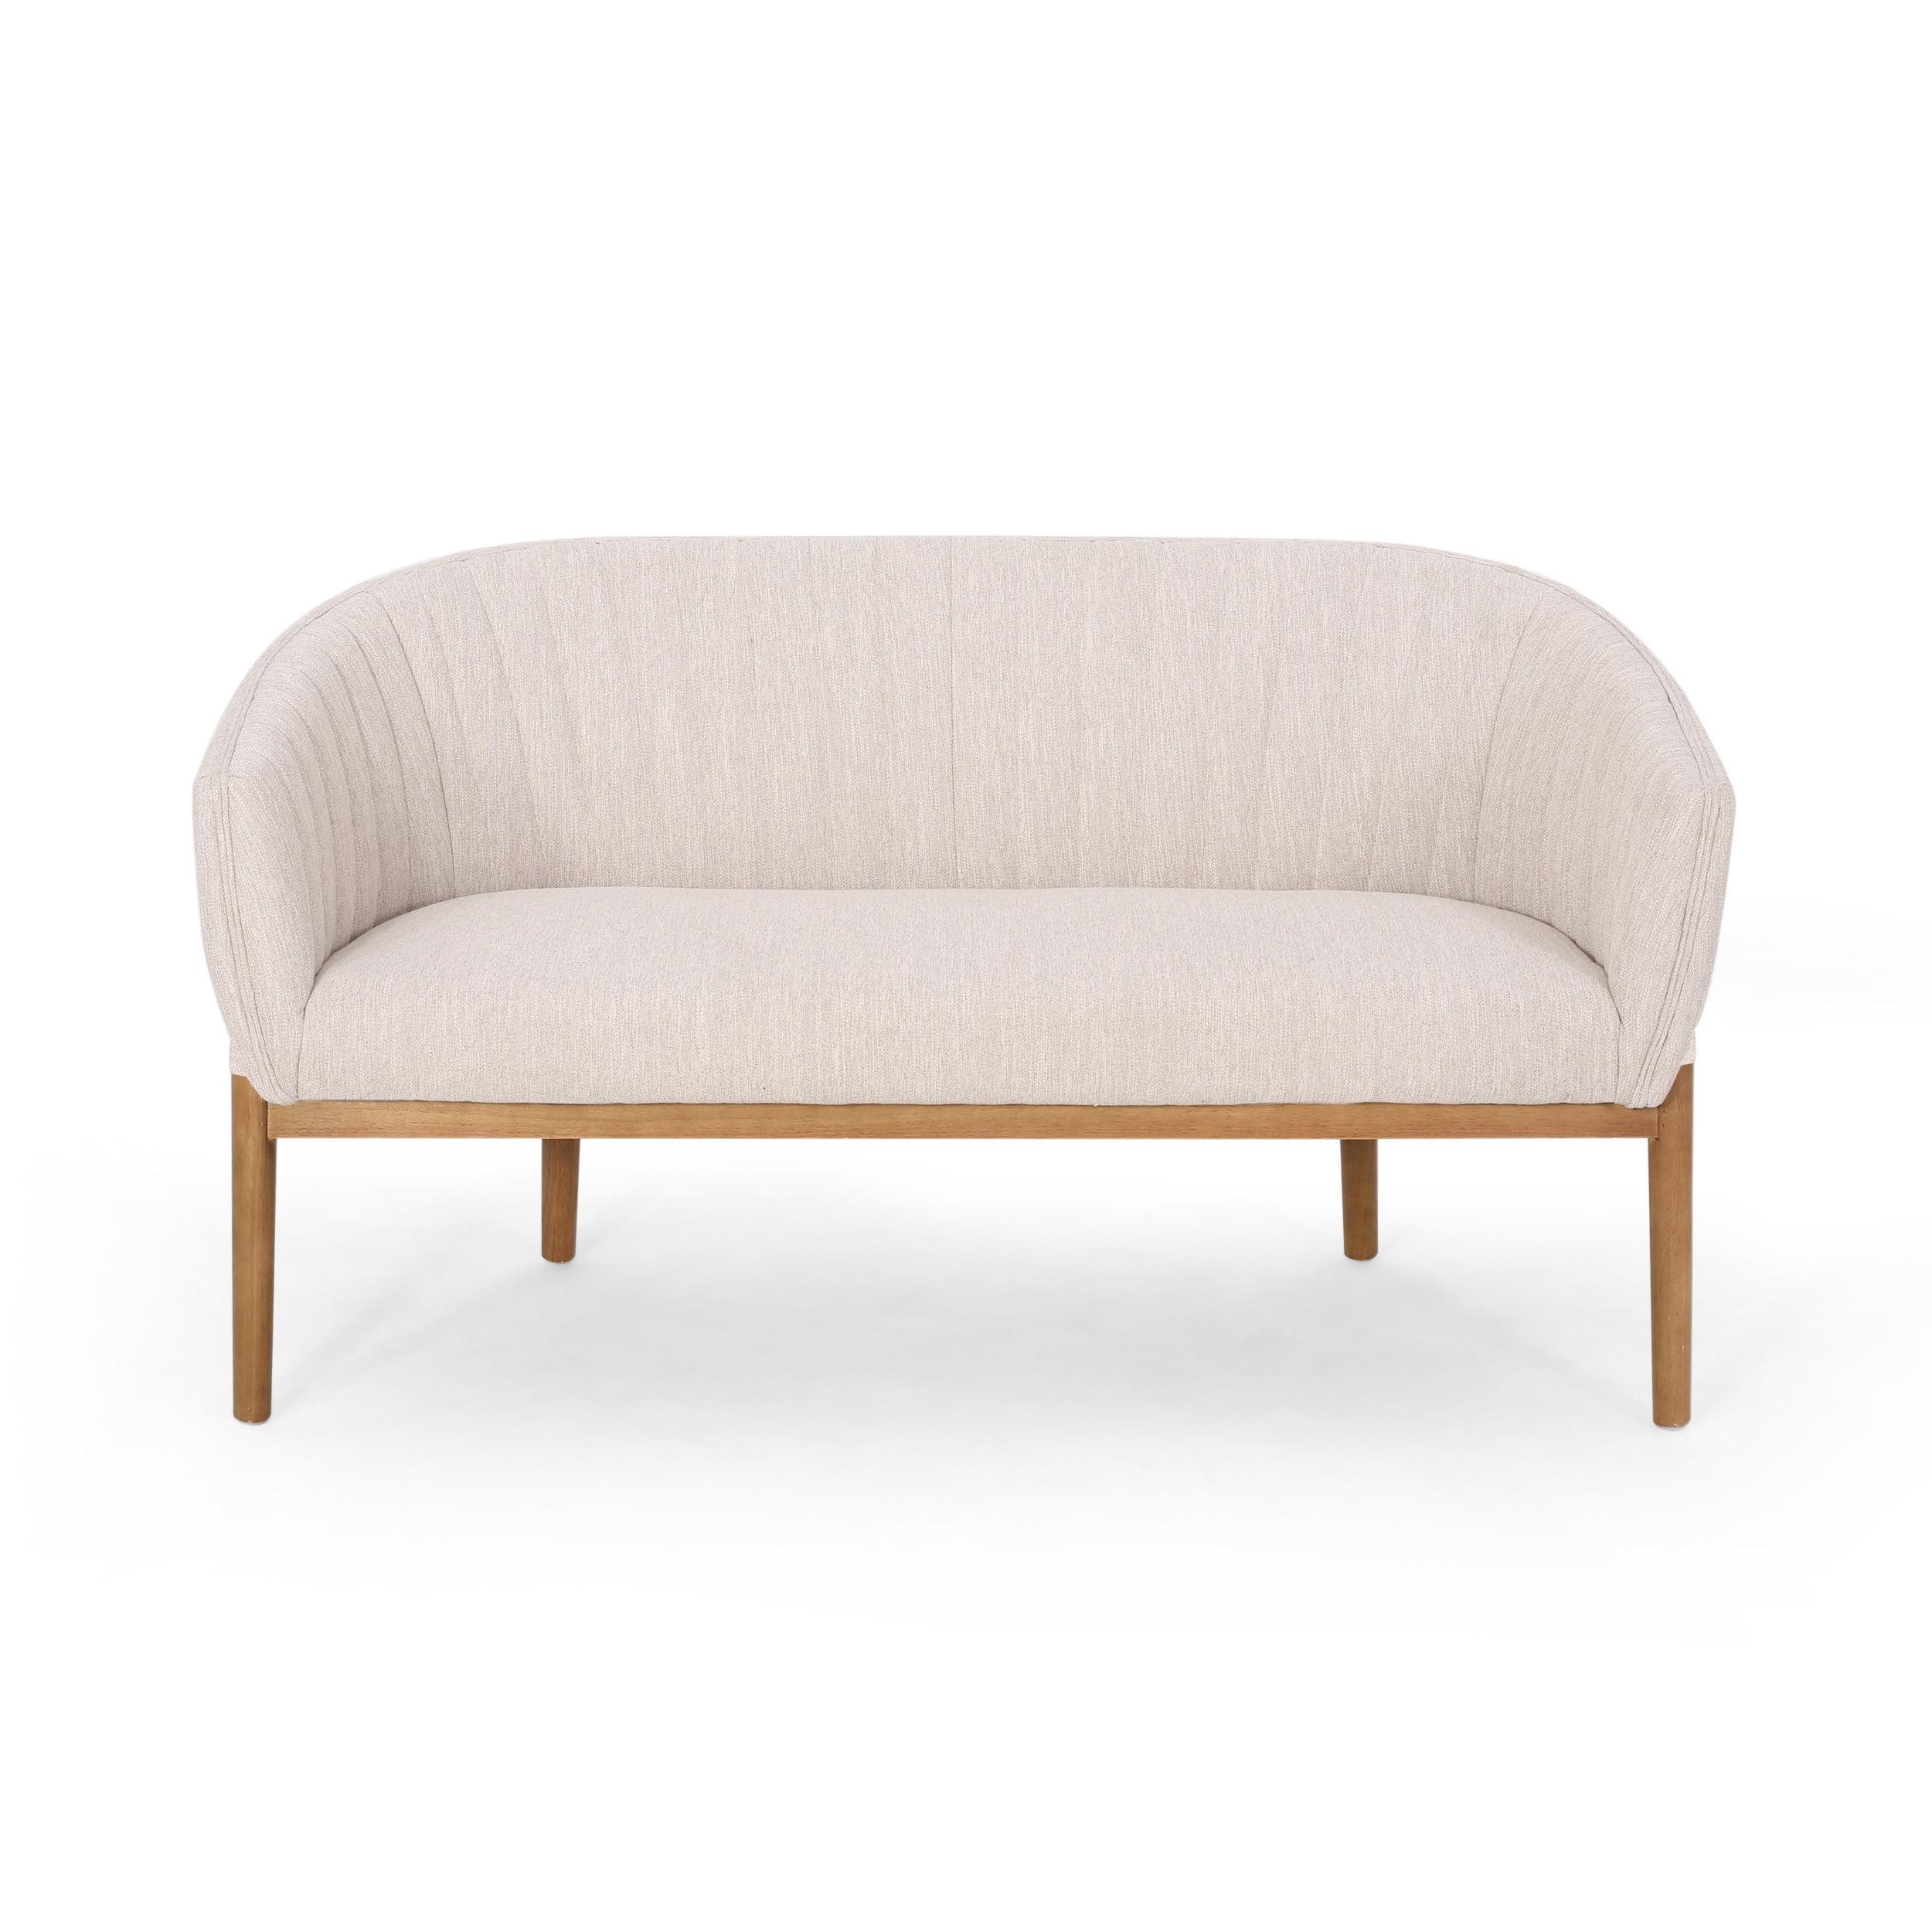 Mid-Century Beige Fabric Loveseat with Channel Stitching and Wood Frame